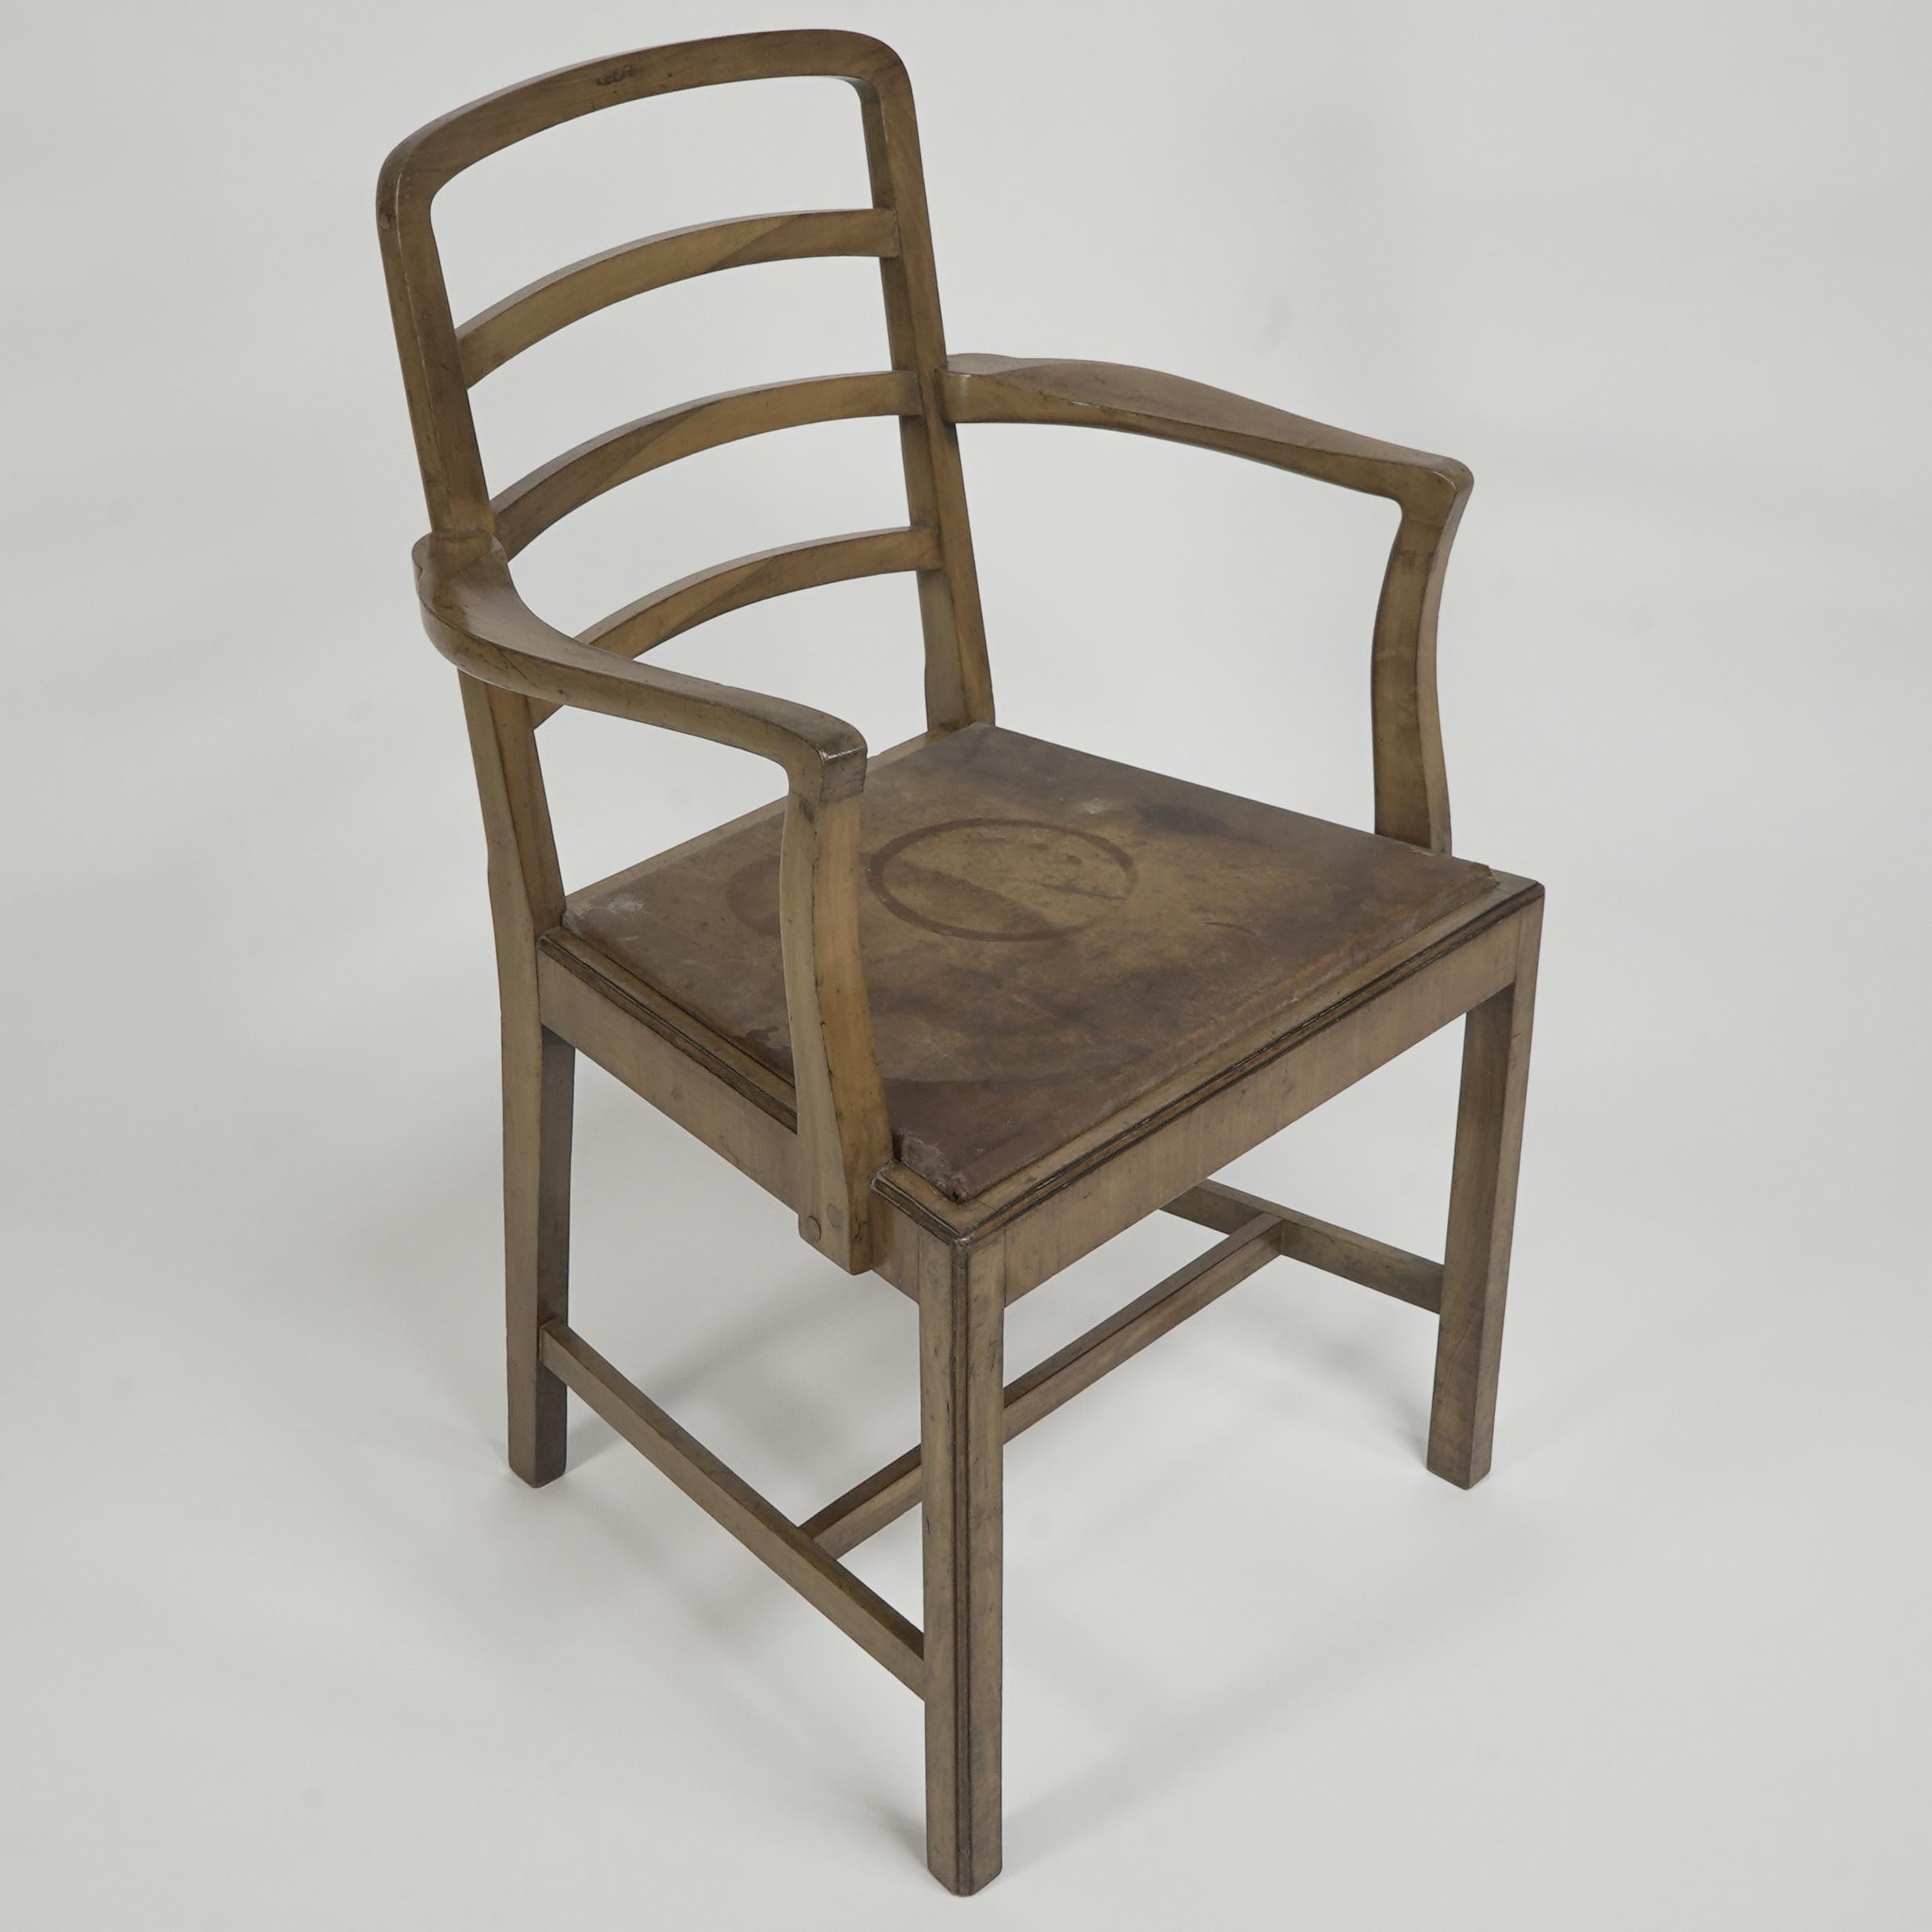 Heals attributed. A Walnut desk chair or armchair with a rounded top and ladder back, sculptured curvaceous arms, the four legs united by an 'H' stretcher.
